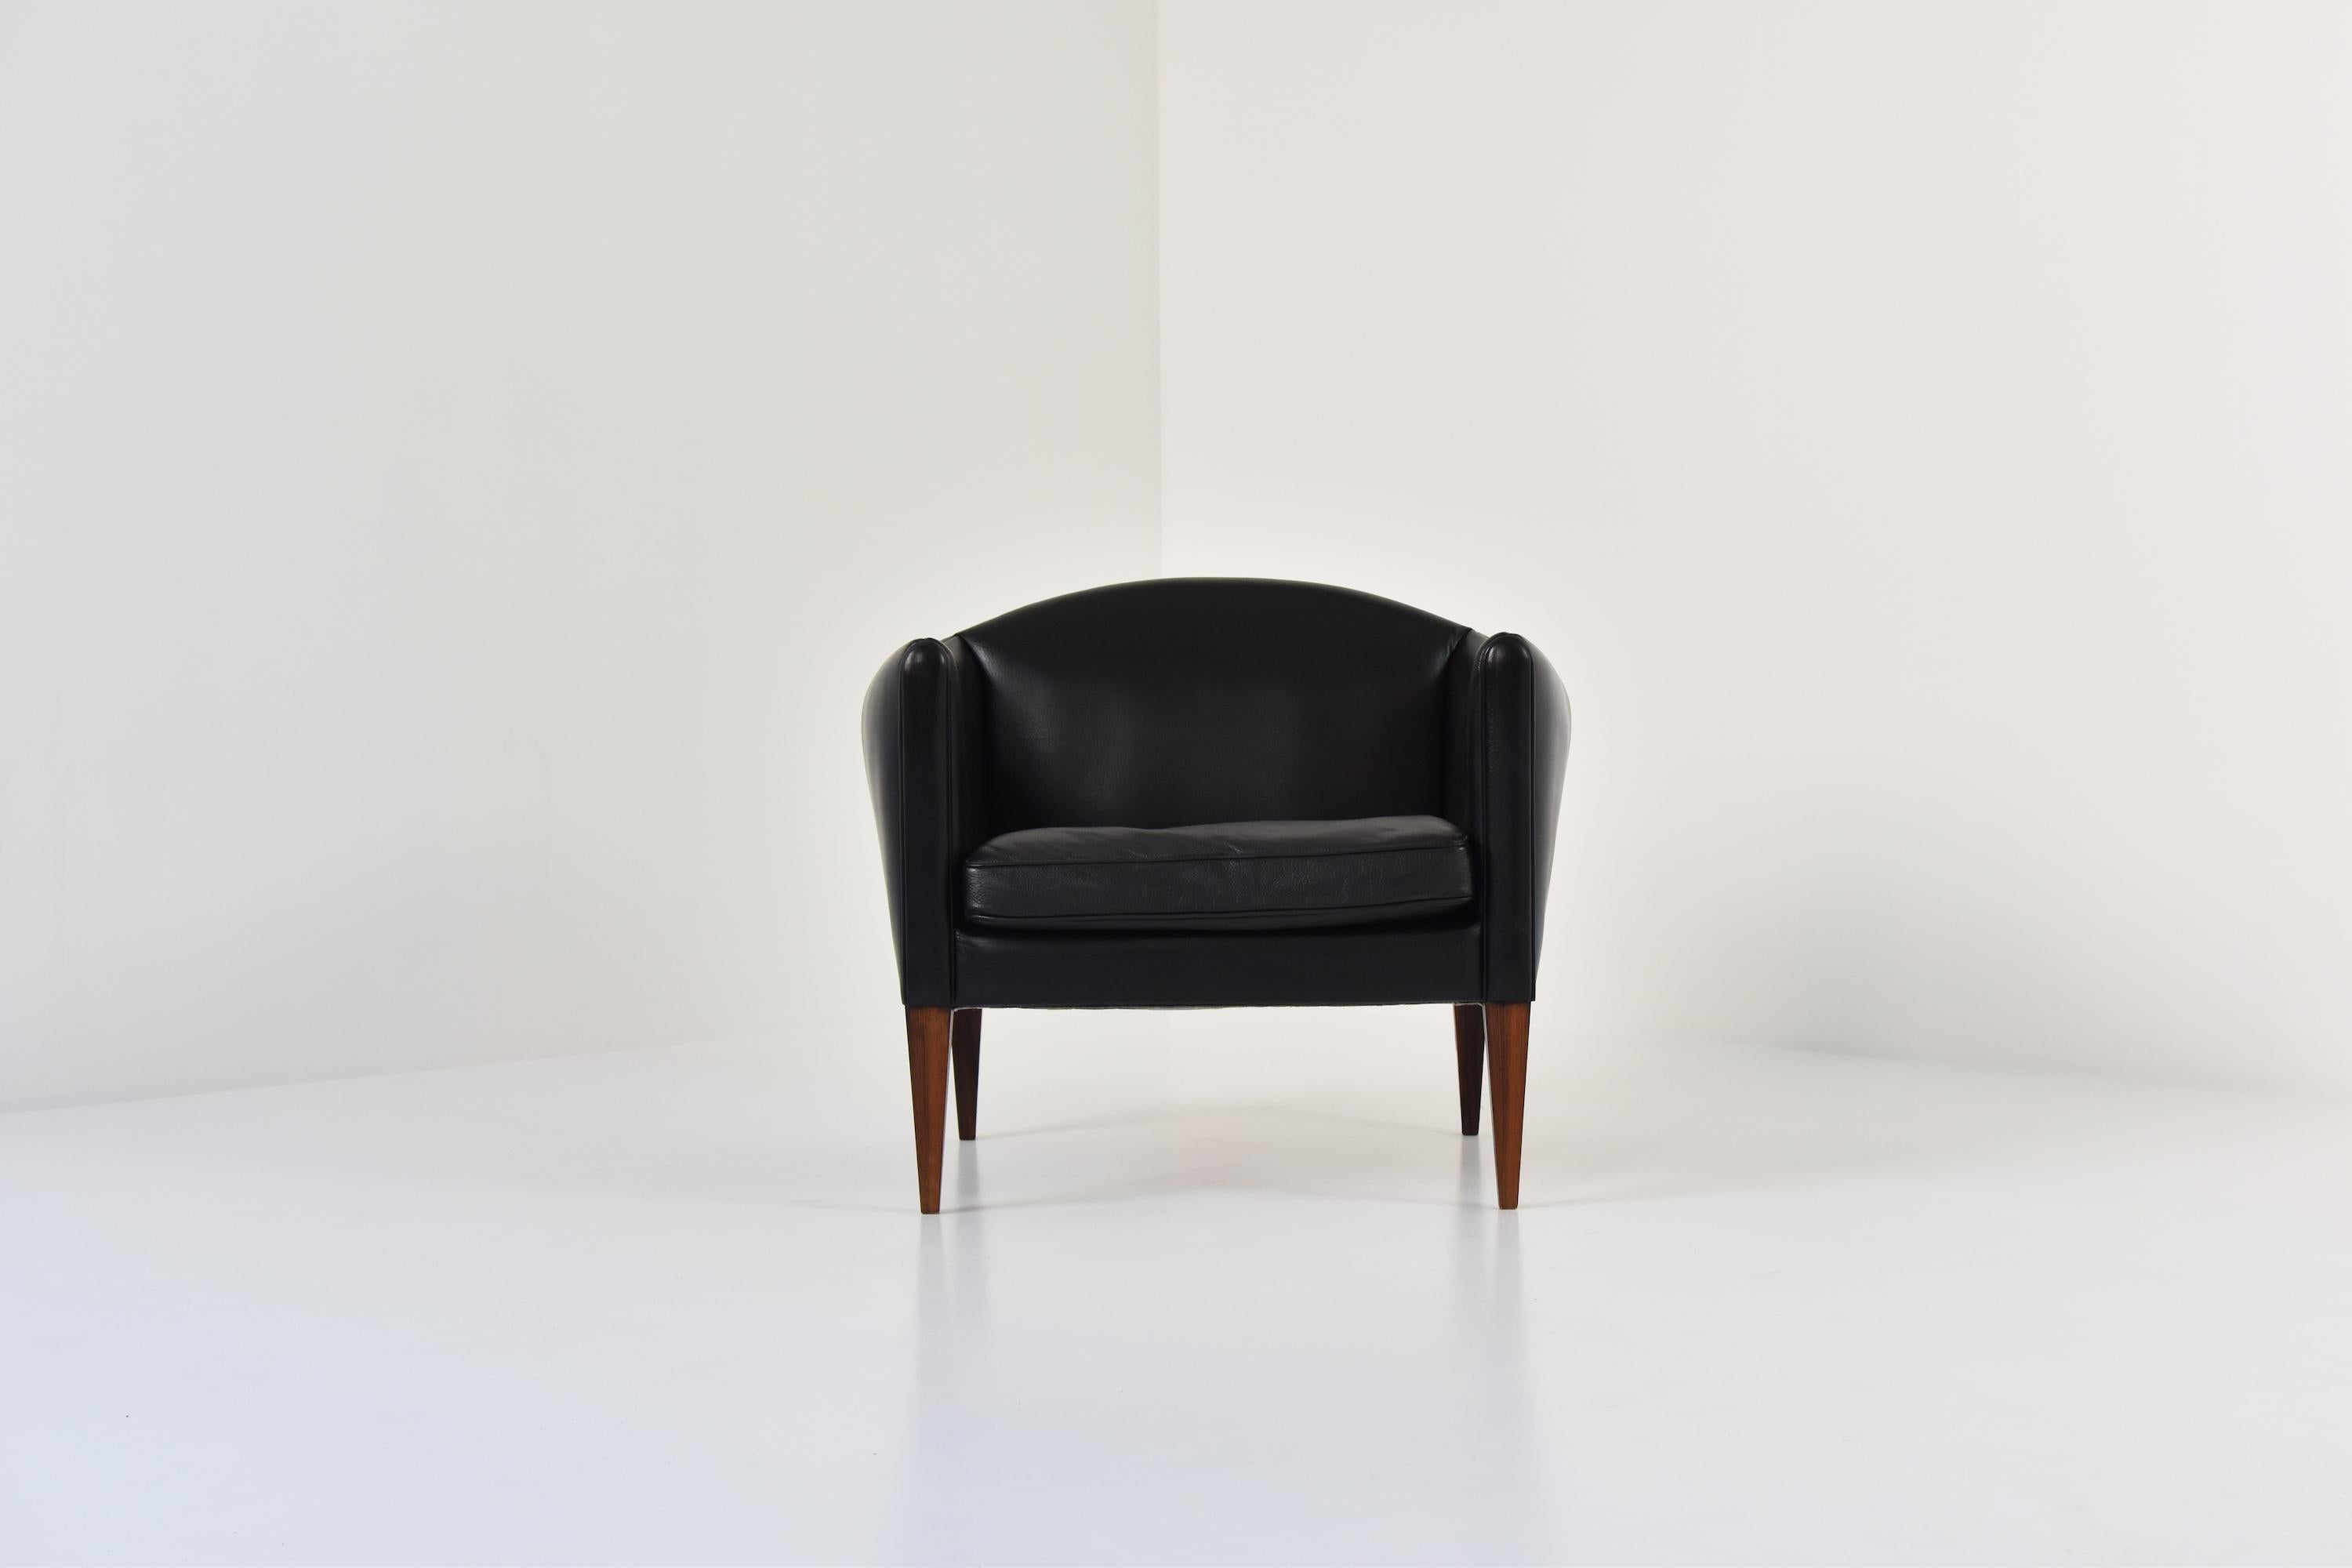 Lovely V12 easy chair by Illum Wikkelsø for Søren Willadsen Møbelfabrik, Denmark, 1960s. This elegant side chair features a black leather upholstery and marvelous shaped rosewood legs. Very good original condition.